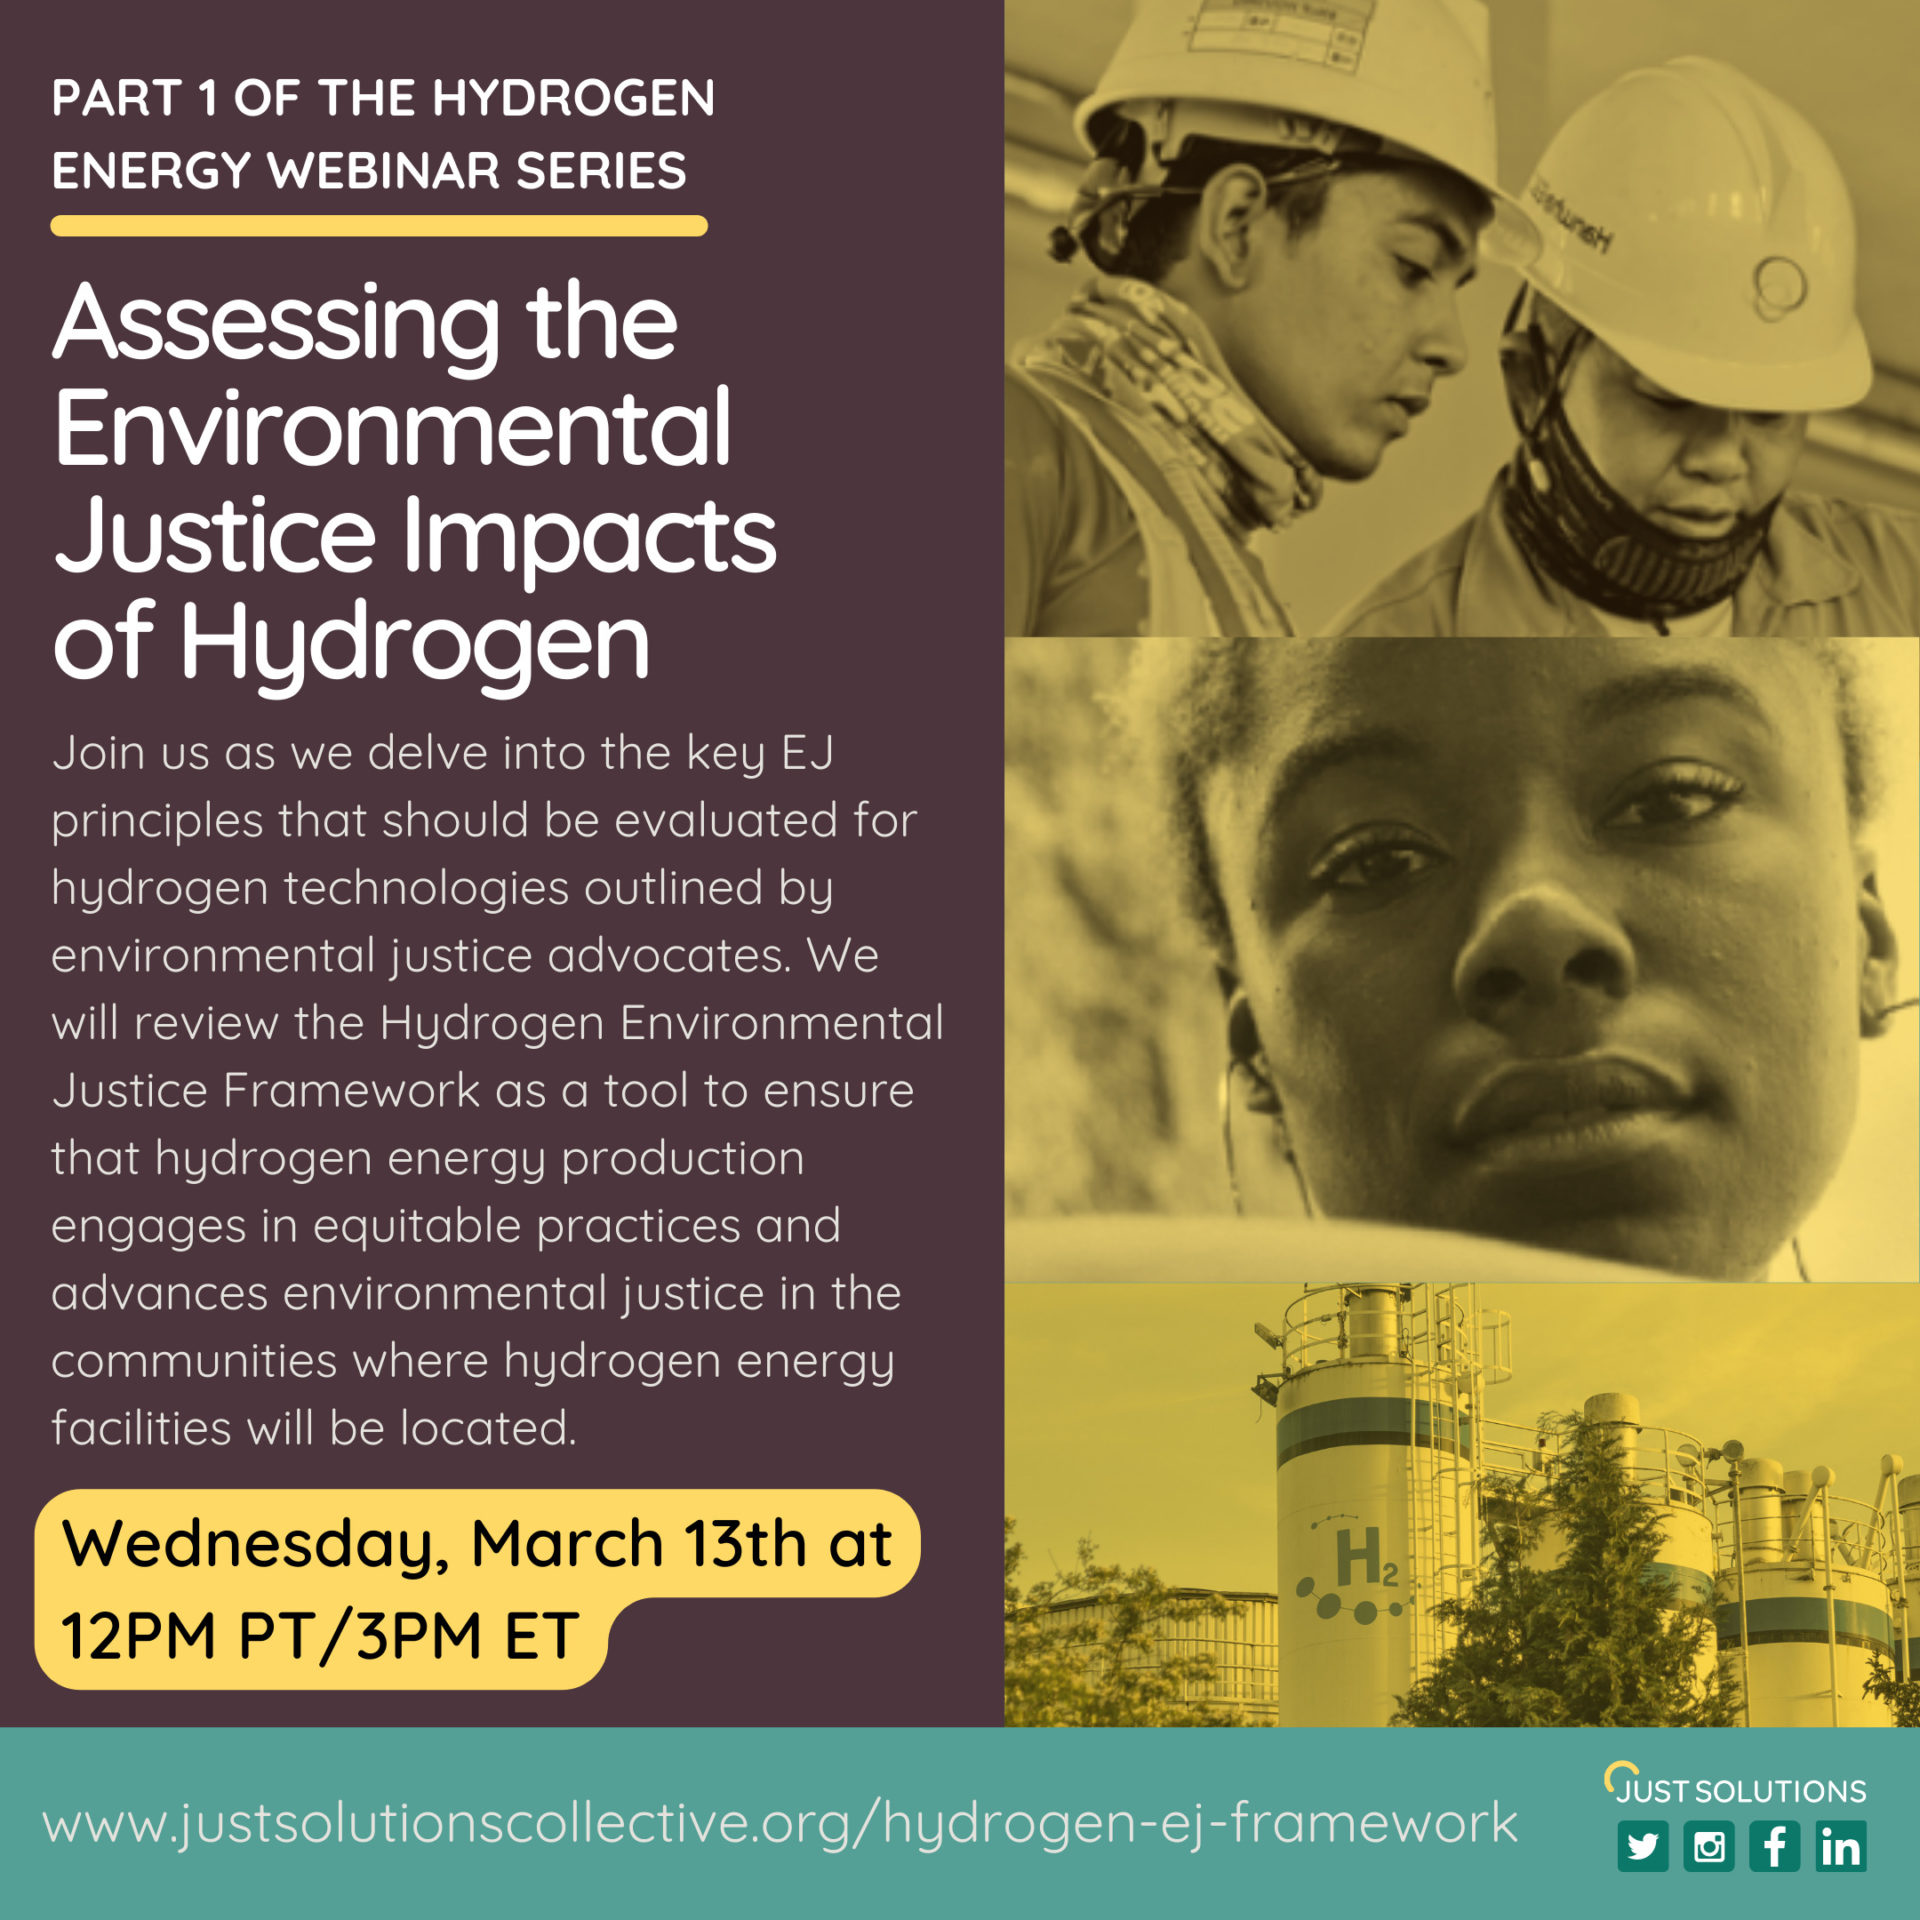 Assessing the Environmental Justice Impacts of Hydrogen